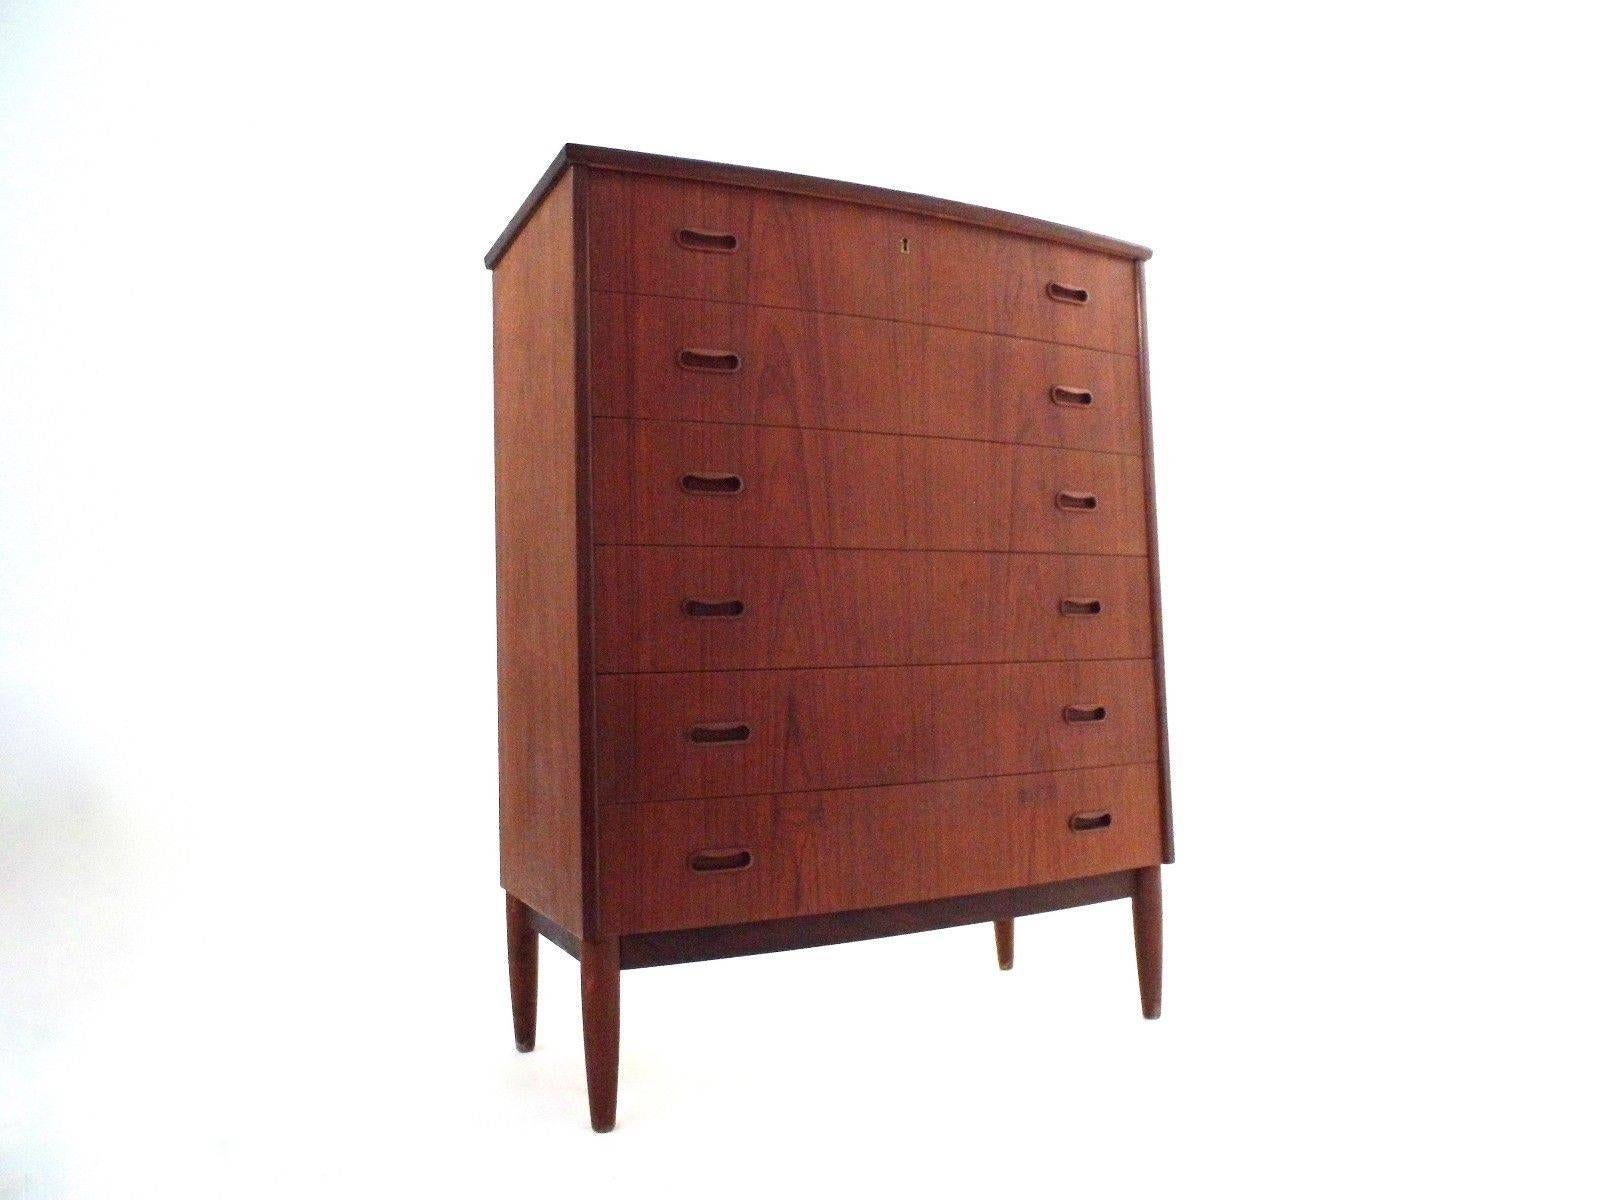 A beautiful Danish teak tallboy chest of drawers with a bowed front, this would make a stylish addition to any bedroom area. The chest has six drawers, all are in good working order with sculptured wooden handles and dovetail joins. A striking piece